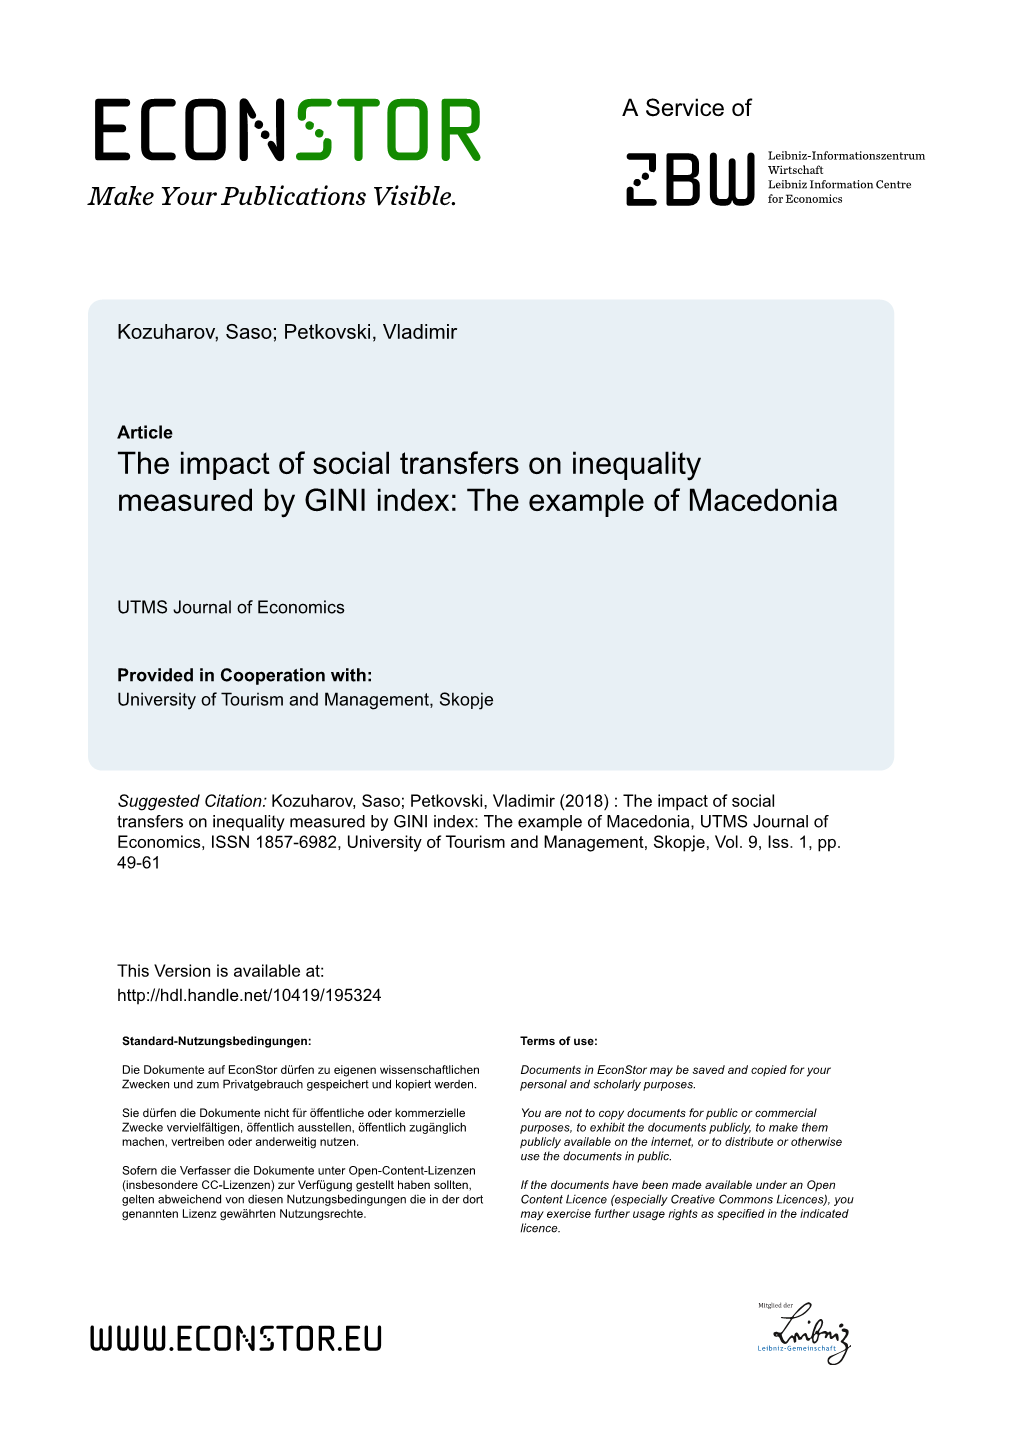 The Impact of Social Transfers on Inequality Measured by GINI Index: the Example of Macedonia